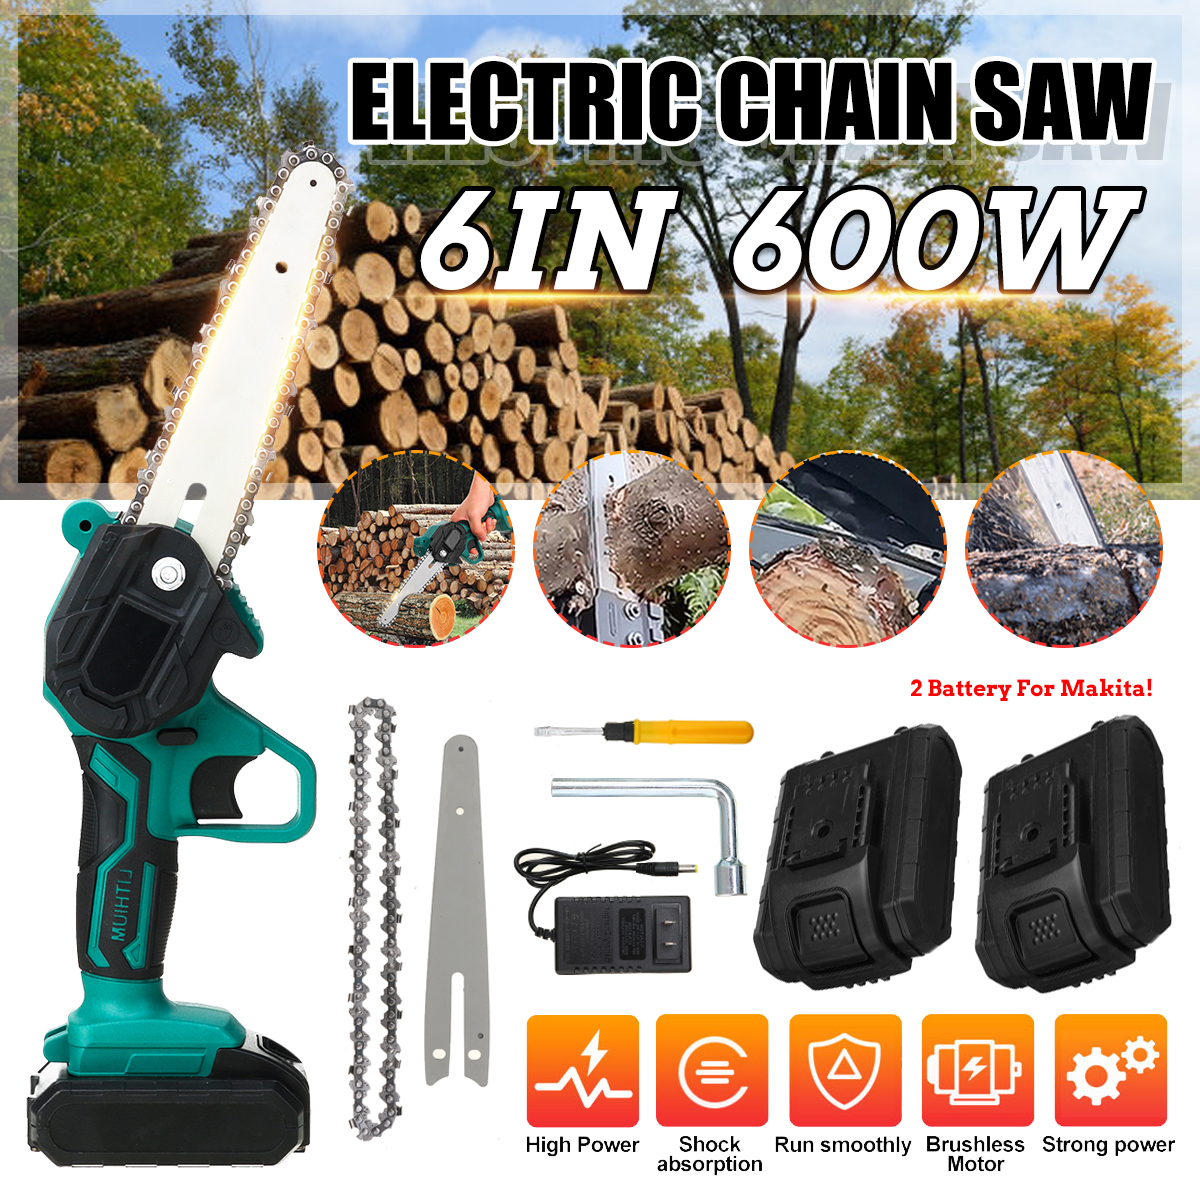 6inch-600W-Portable-Electric-Chain-Saw-Rechargeable-Saws-Wood-Cutter-Woodworking-Tool-W-2pcs-Battery-1827209-2